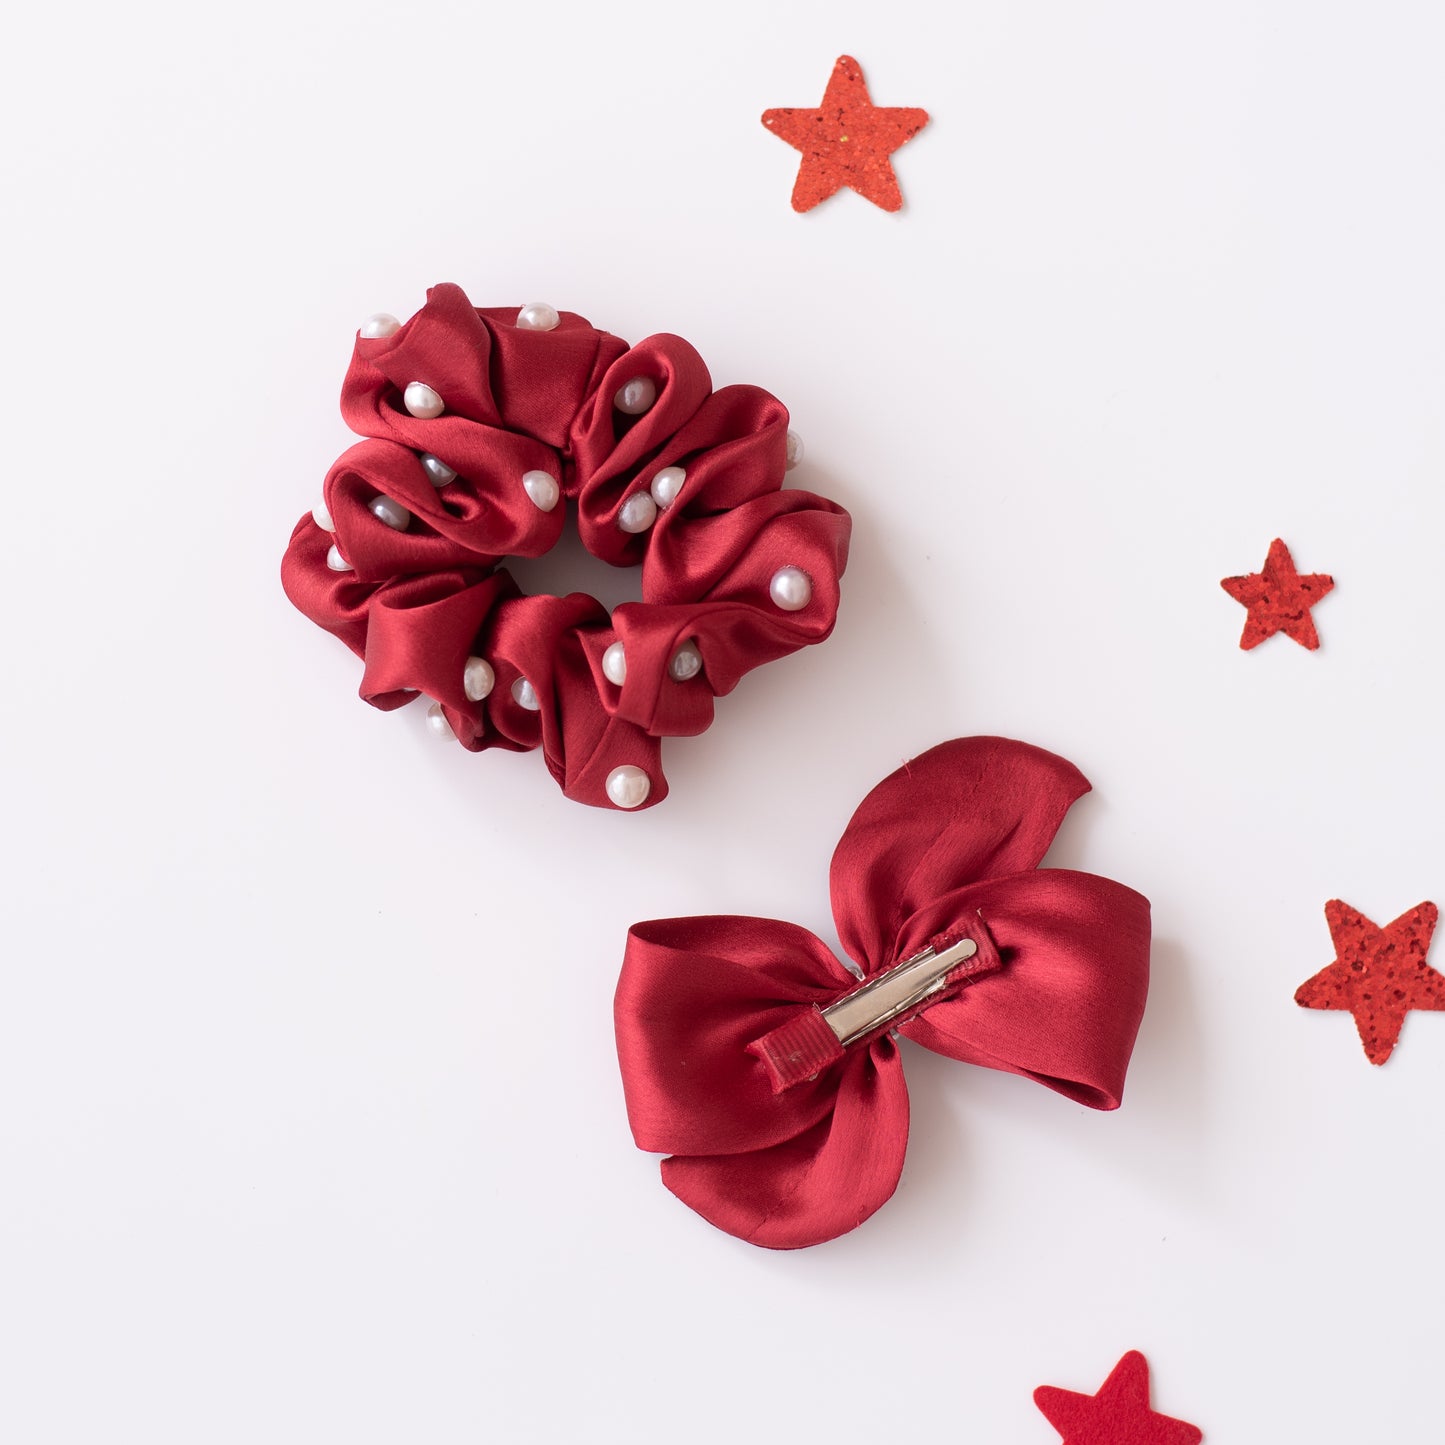 Christmas Combo: Set of 1 bow on alligator pin and one satin scrunchie. Both embellished with pearls - Maroon